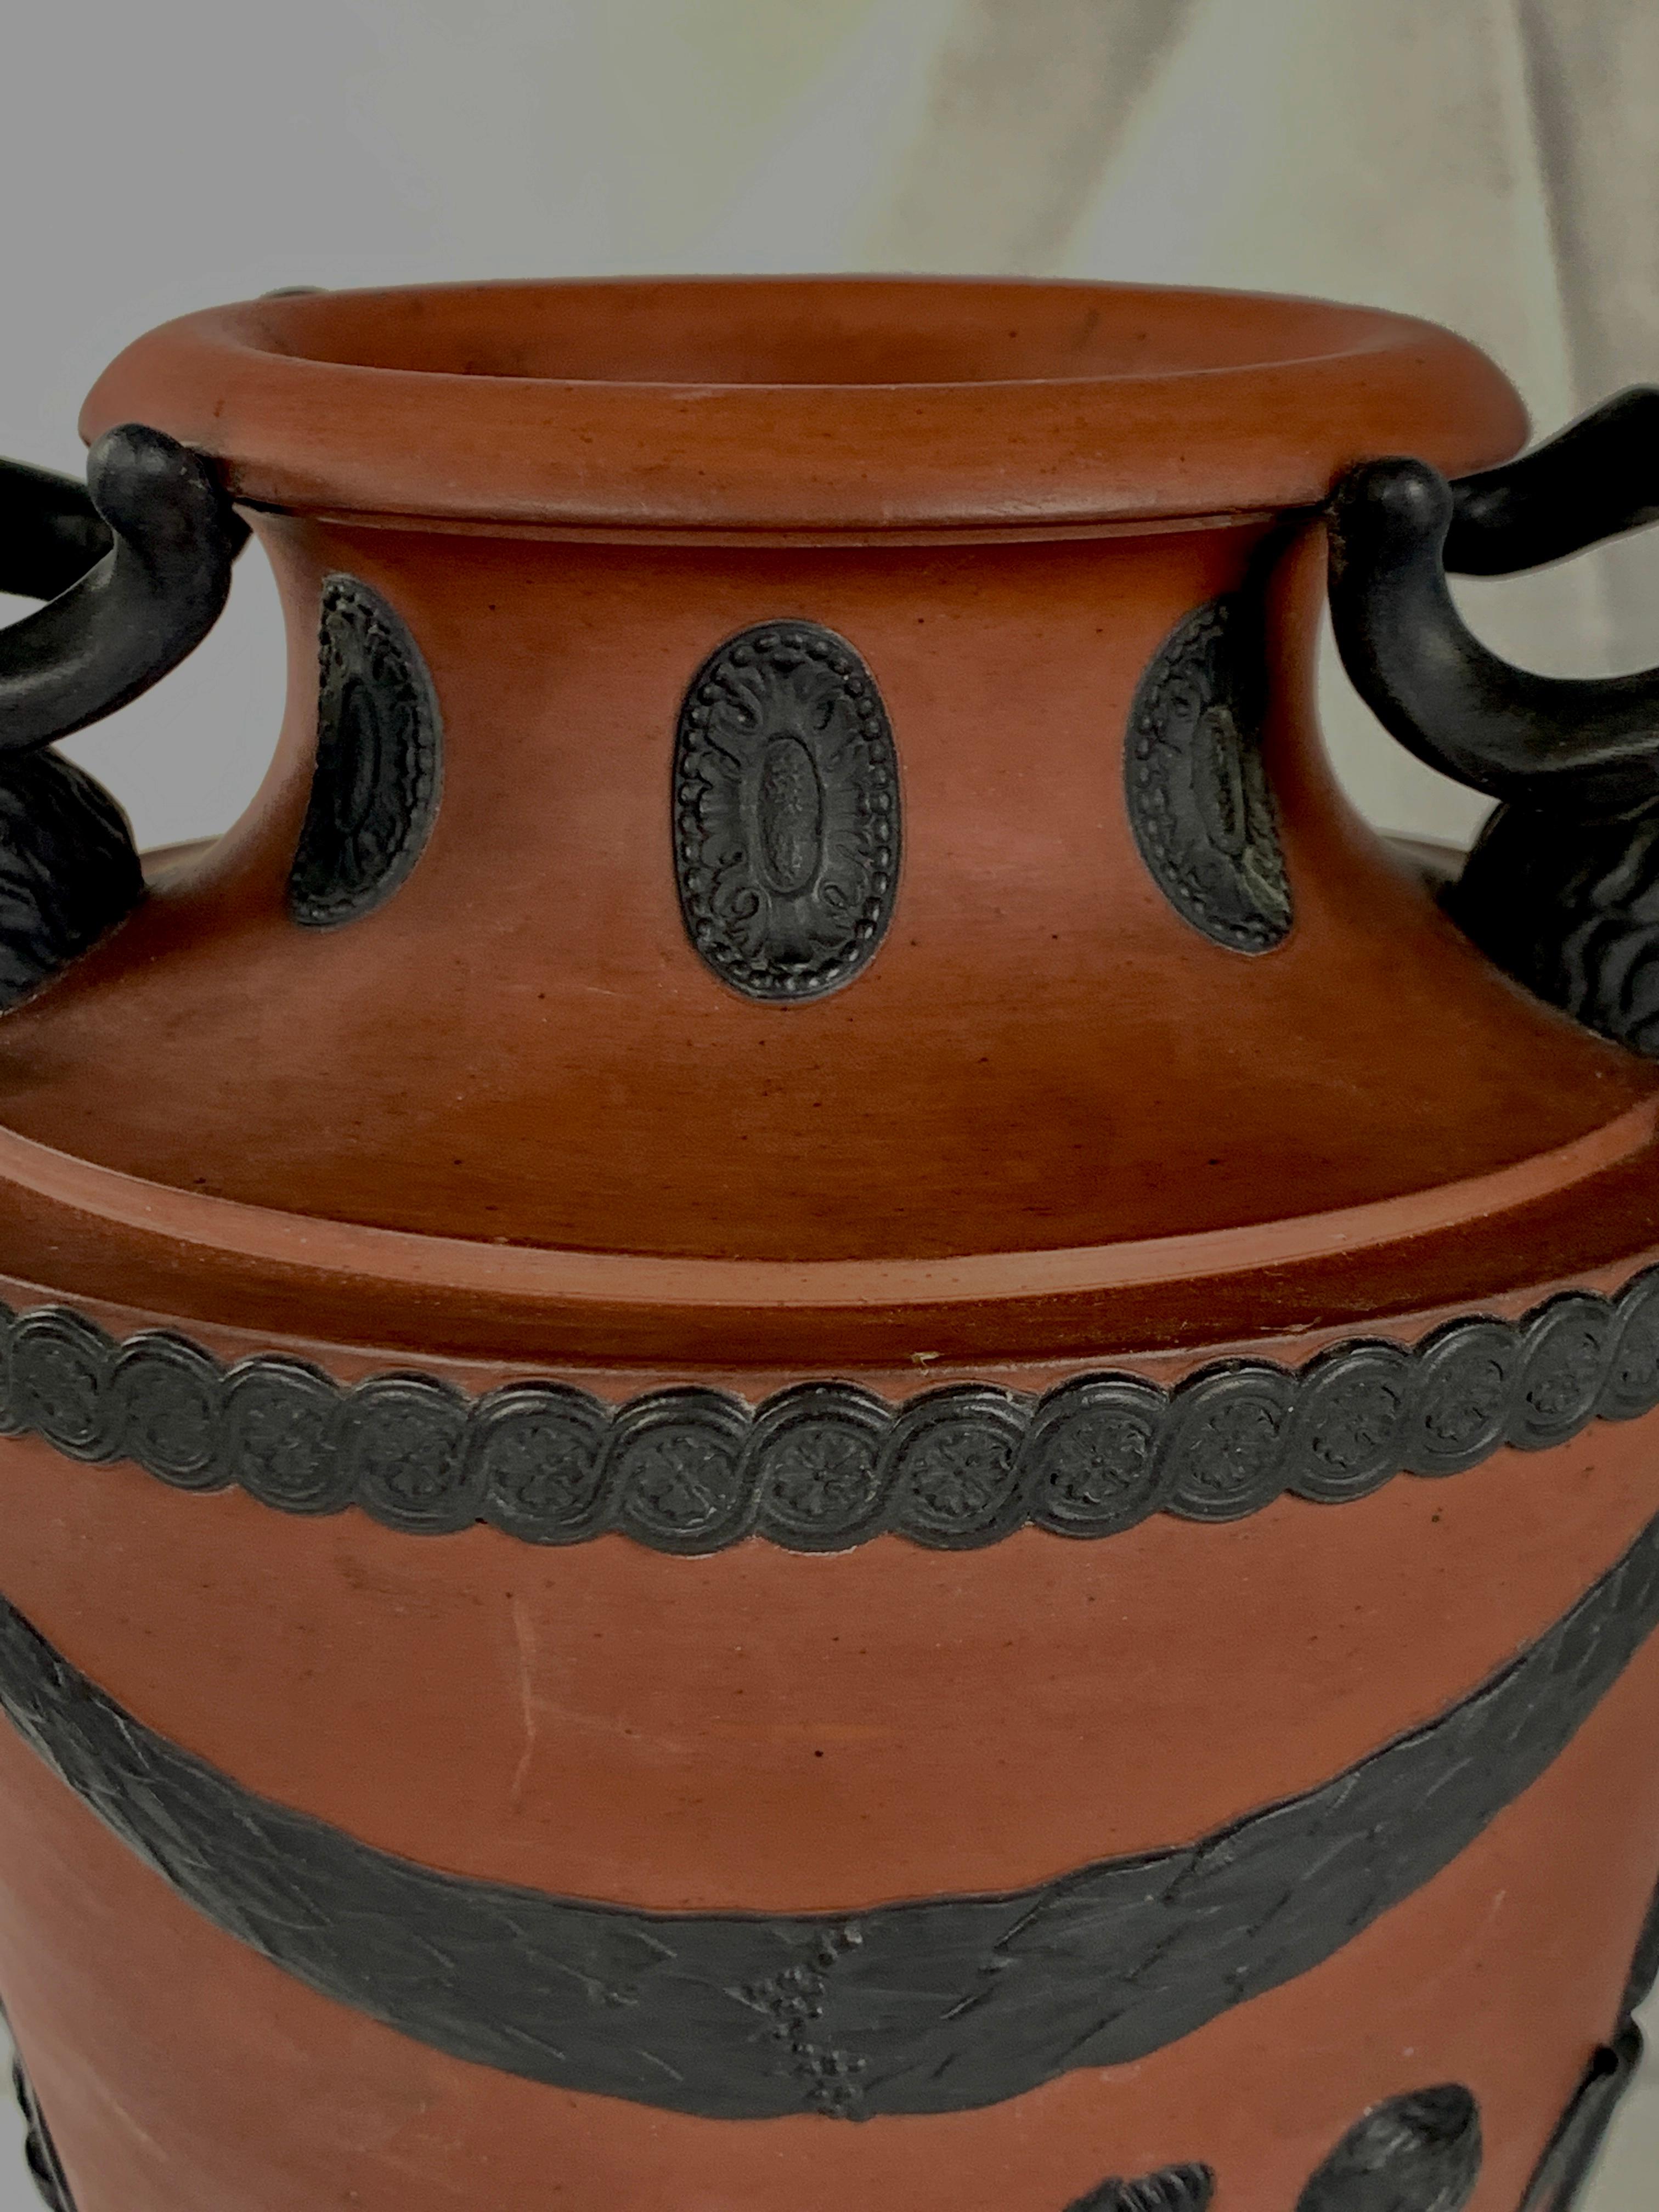 Rosso Antico and Black Basalt Vase Made Circa 1815 with Neoclassical Decoration 2